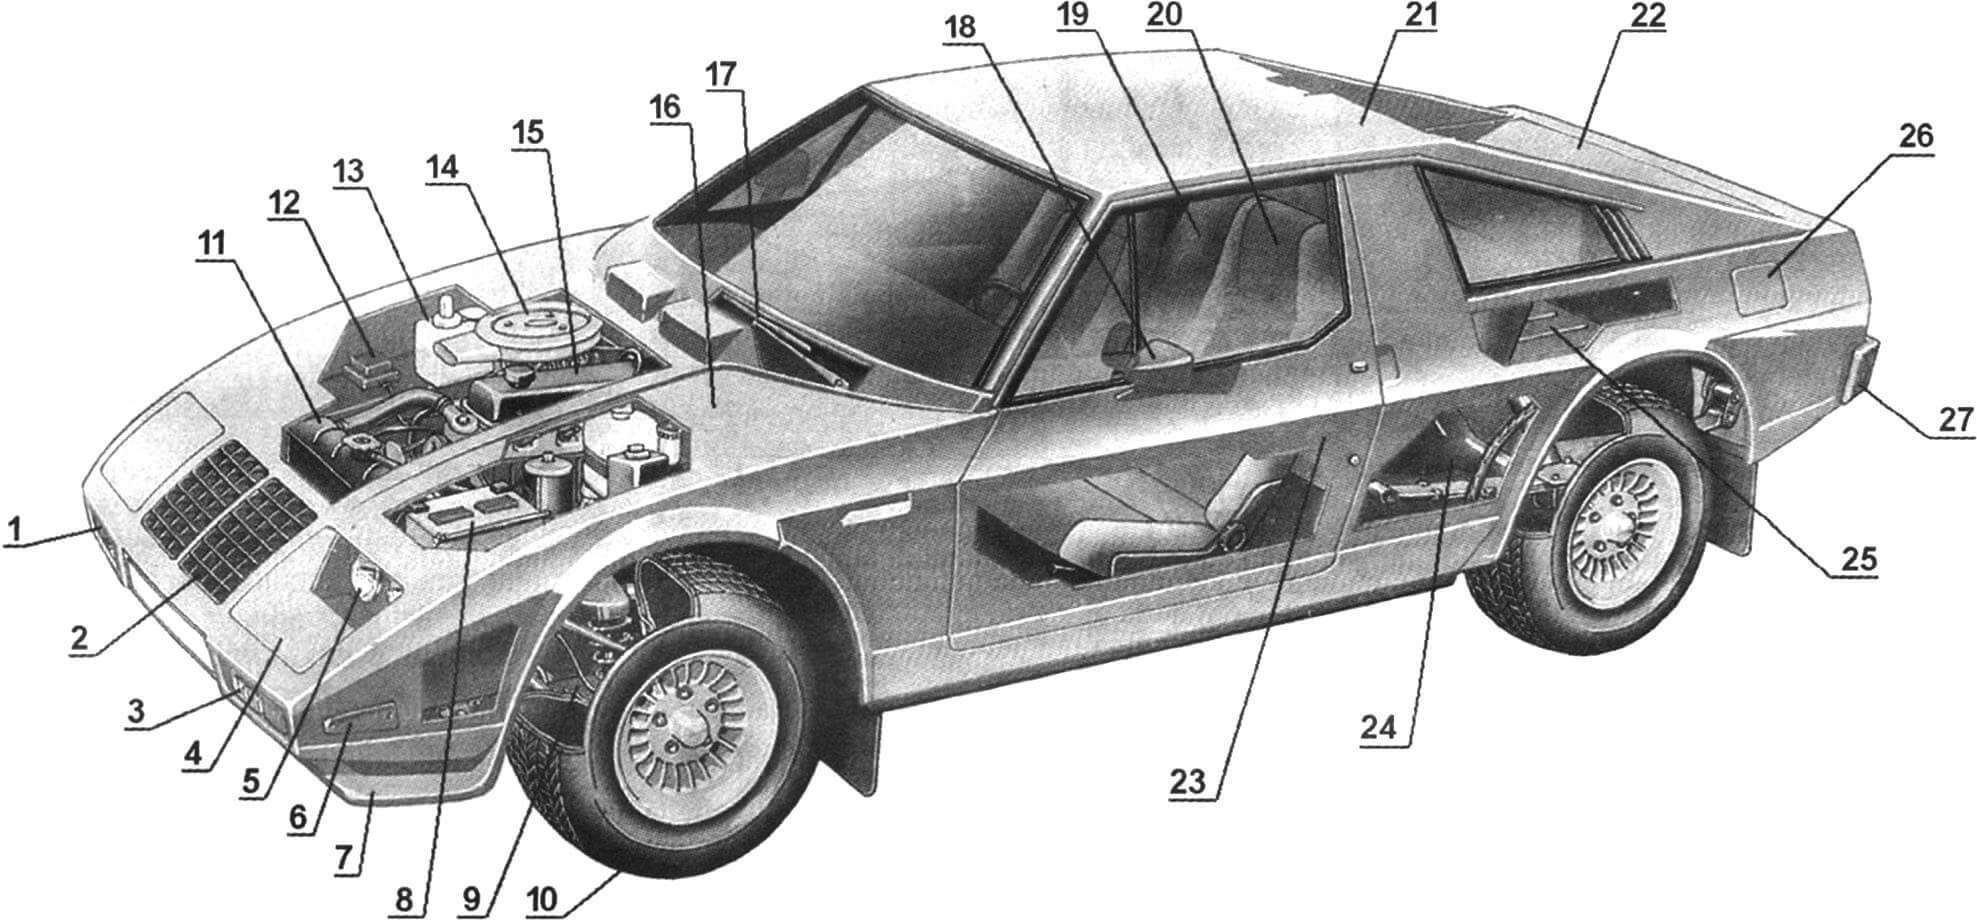 The layout of the "YUNA" car